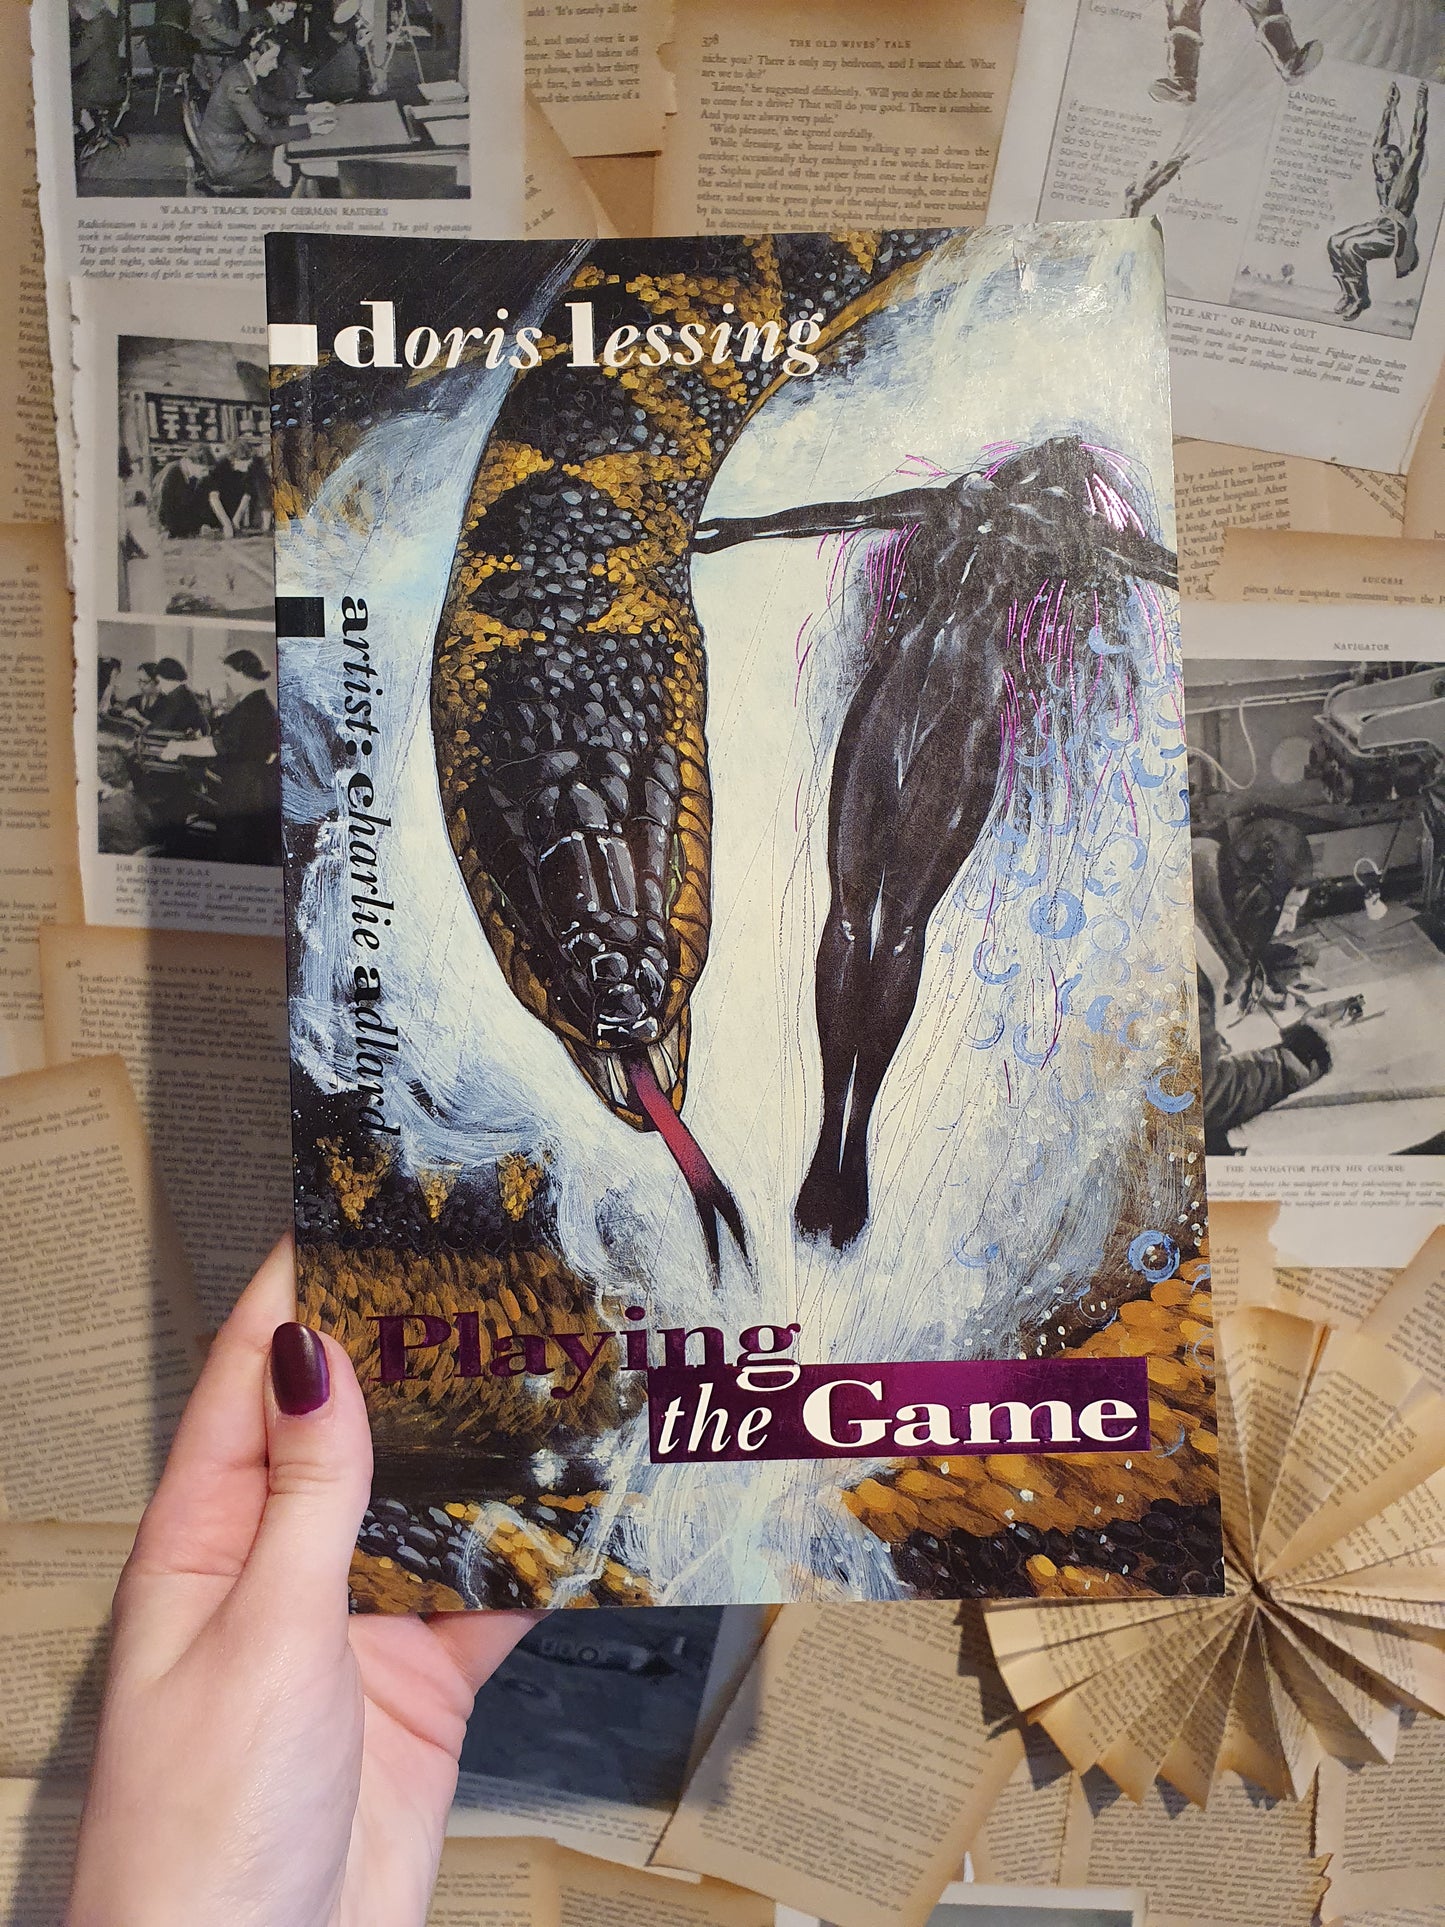 Playing the Game by Doris Lessing (1995)